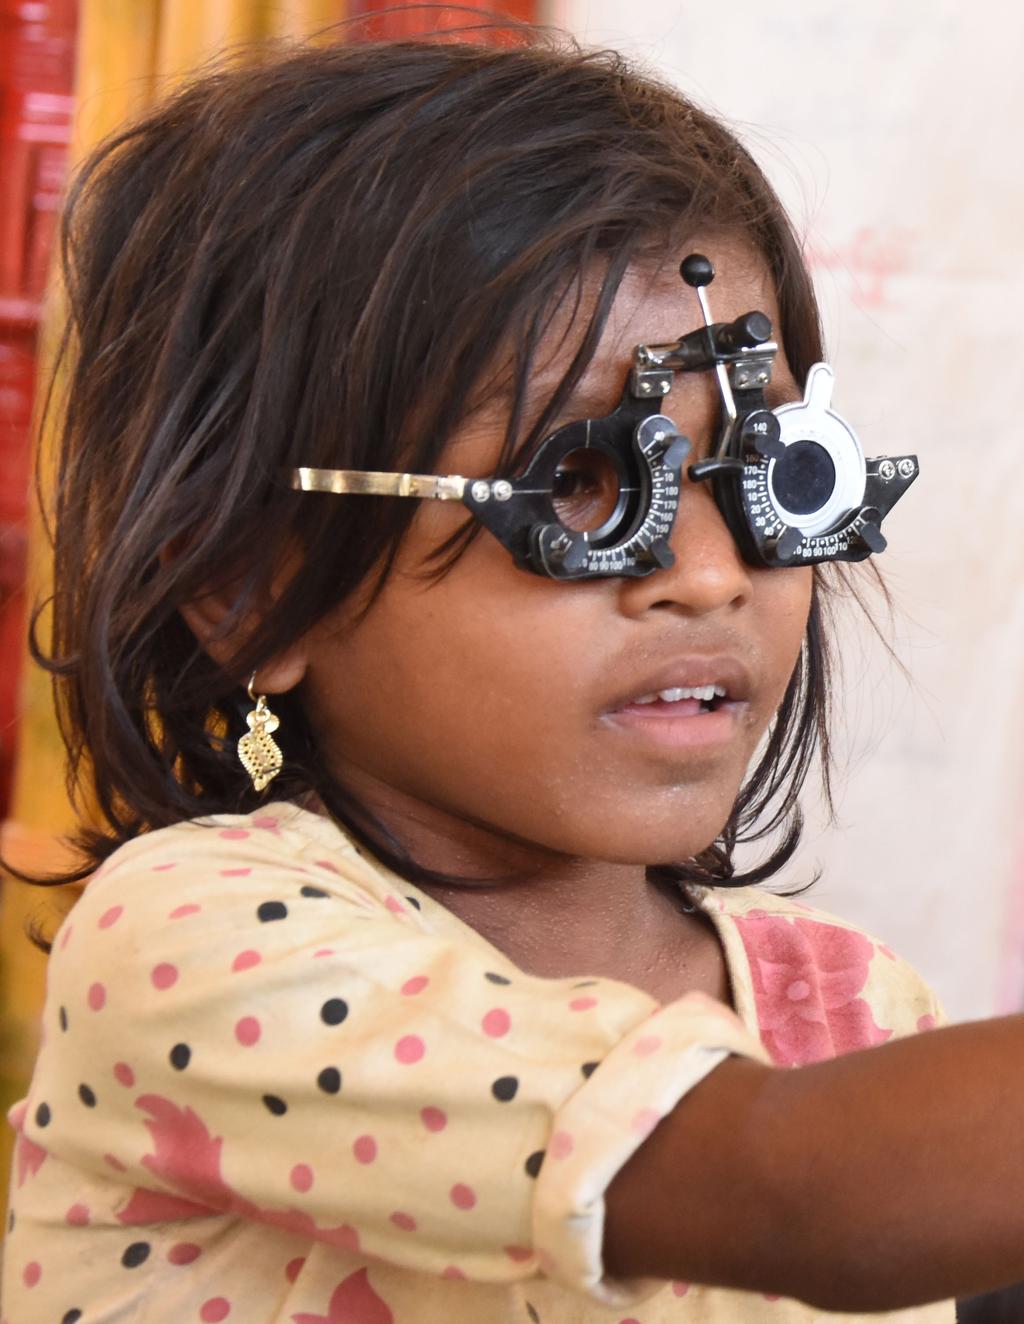 THE INTERNATIONAL AGENCY FOR THE PREVENTION OF BLINDNESS A Situational Analysis: EYE CARE NEEDS OF ROHINGYA REFUGEES